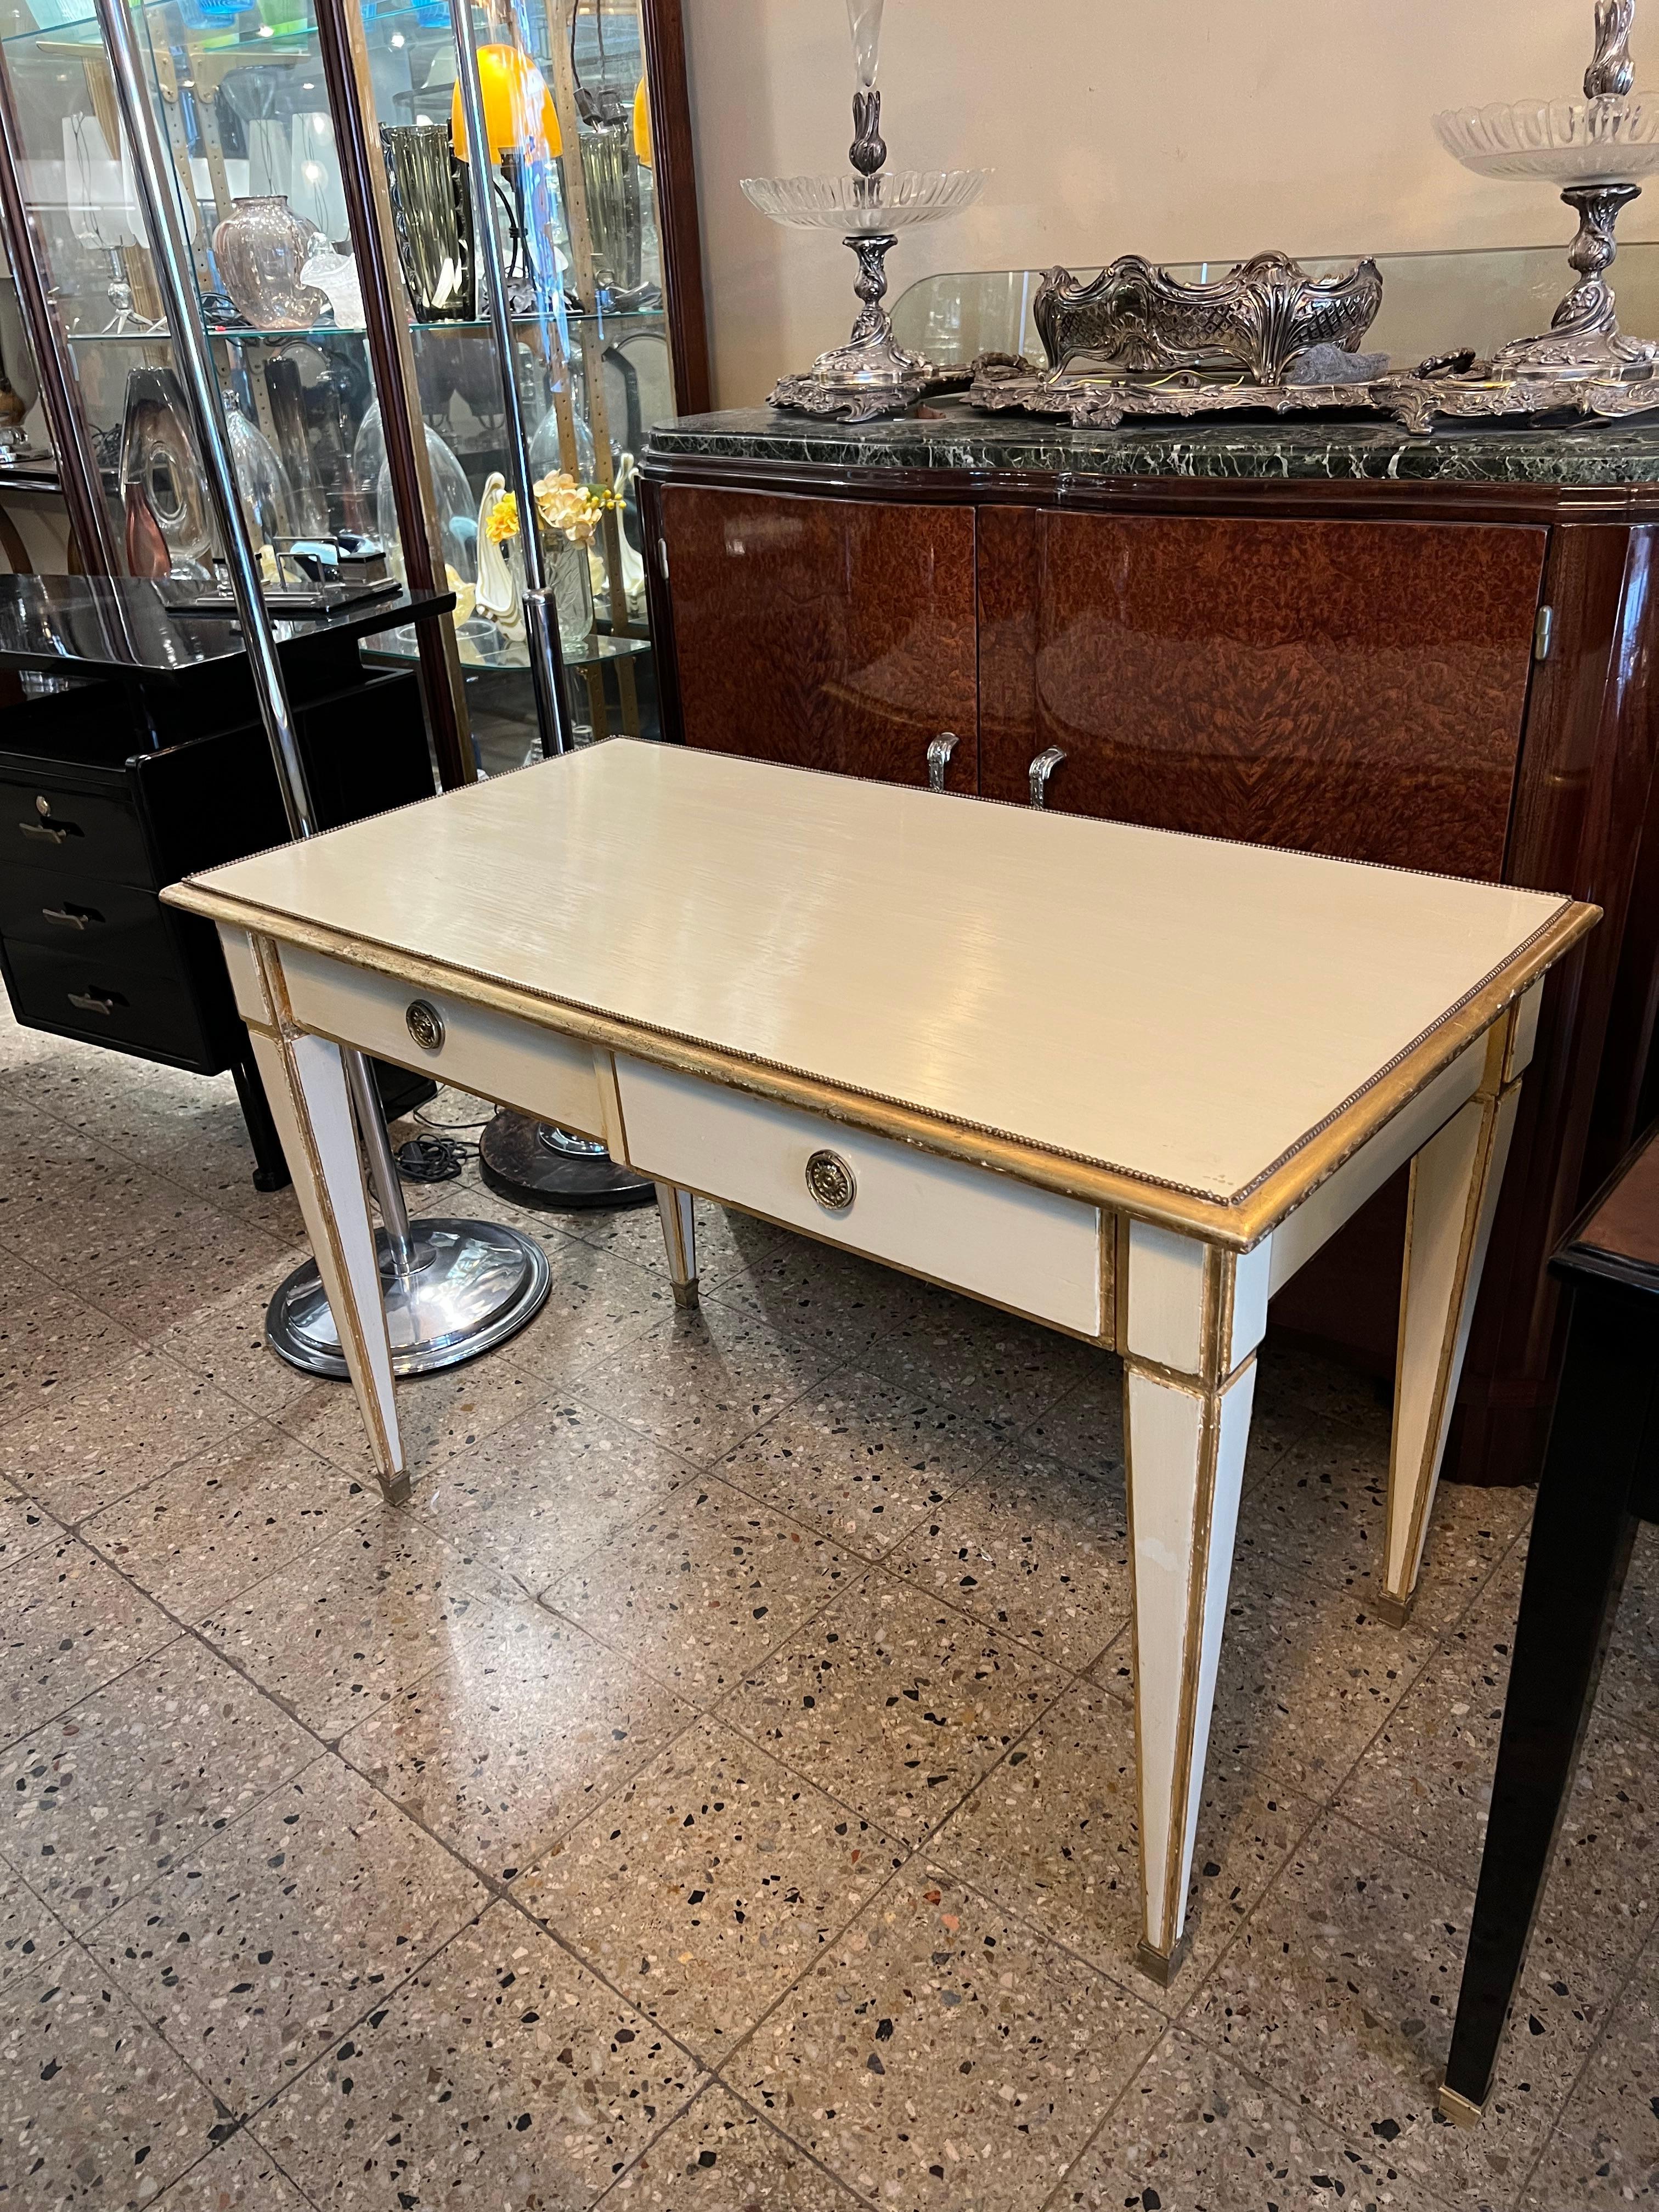 Wood desk from the 50s,
One drawer is fixed, it was used to hide a safe underneath
We have specialized in the sale of Art Deco and Art Nouveau and Vintage styles since 1982. If you have any questions we are at your disposal.
Pushing the button that